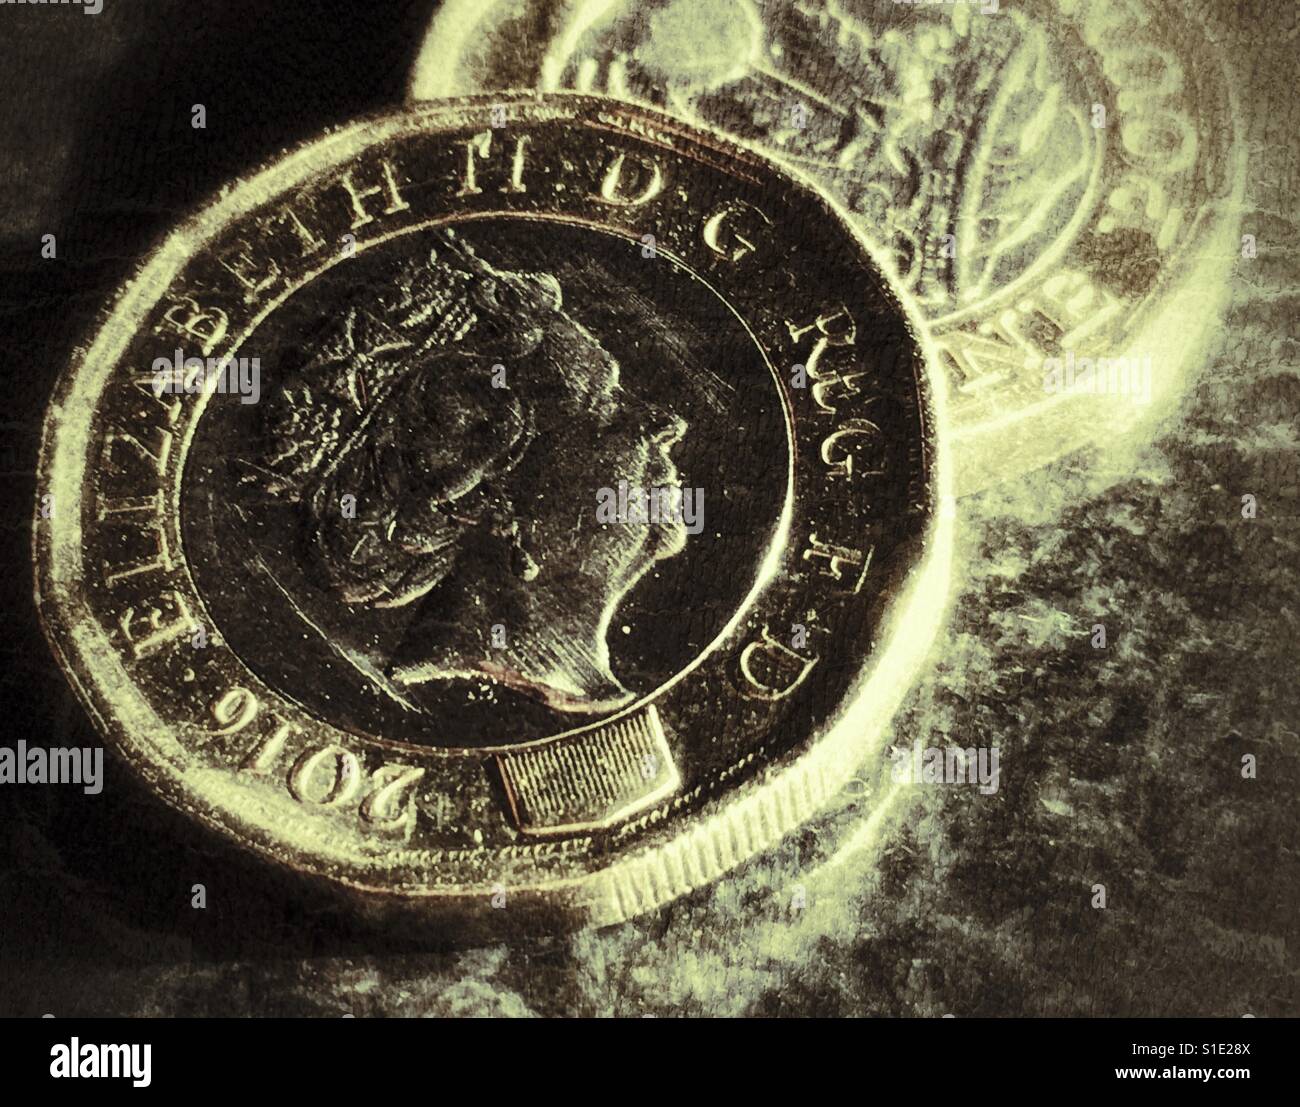 New design of British £1 coin, minted in 2026 released in 2017 Stock Photo